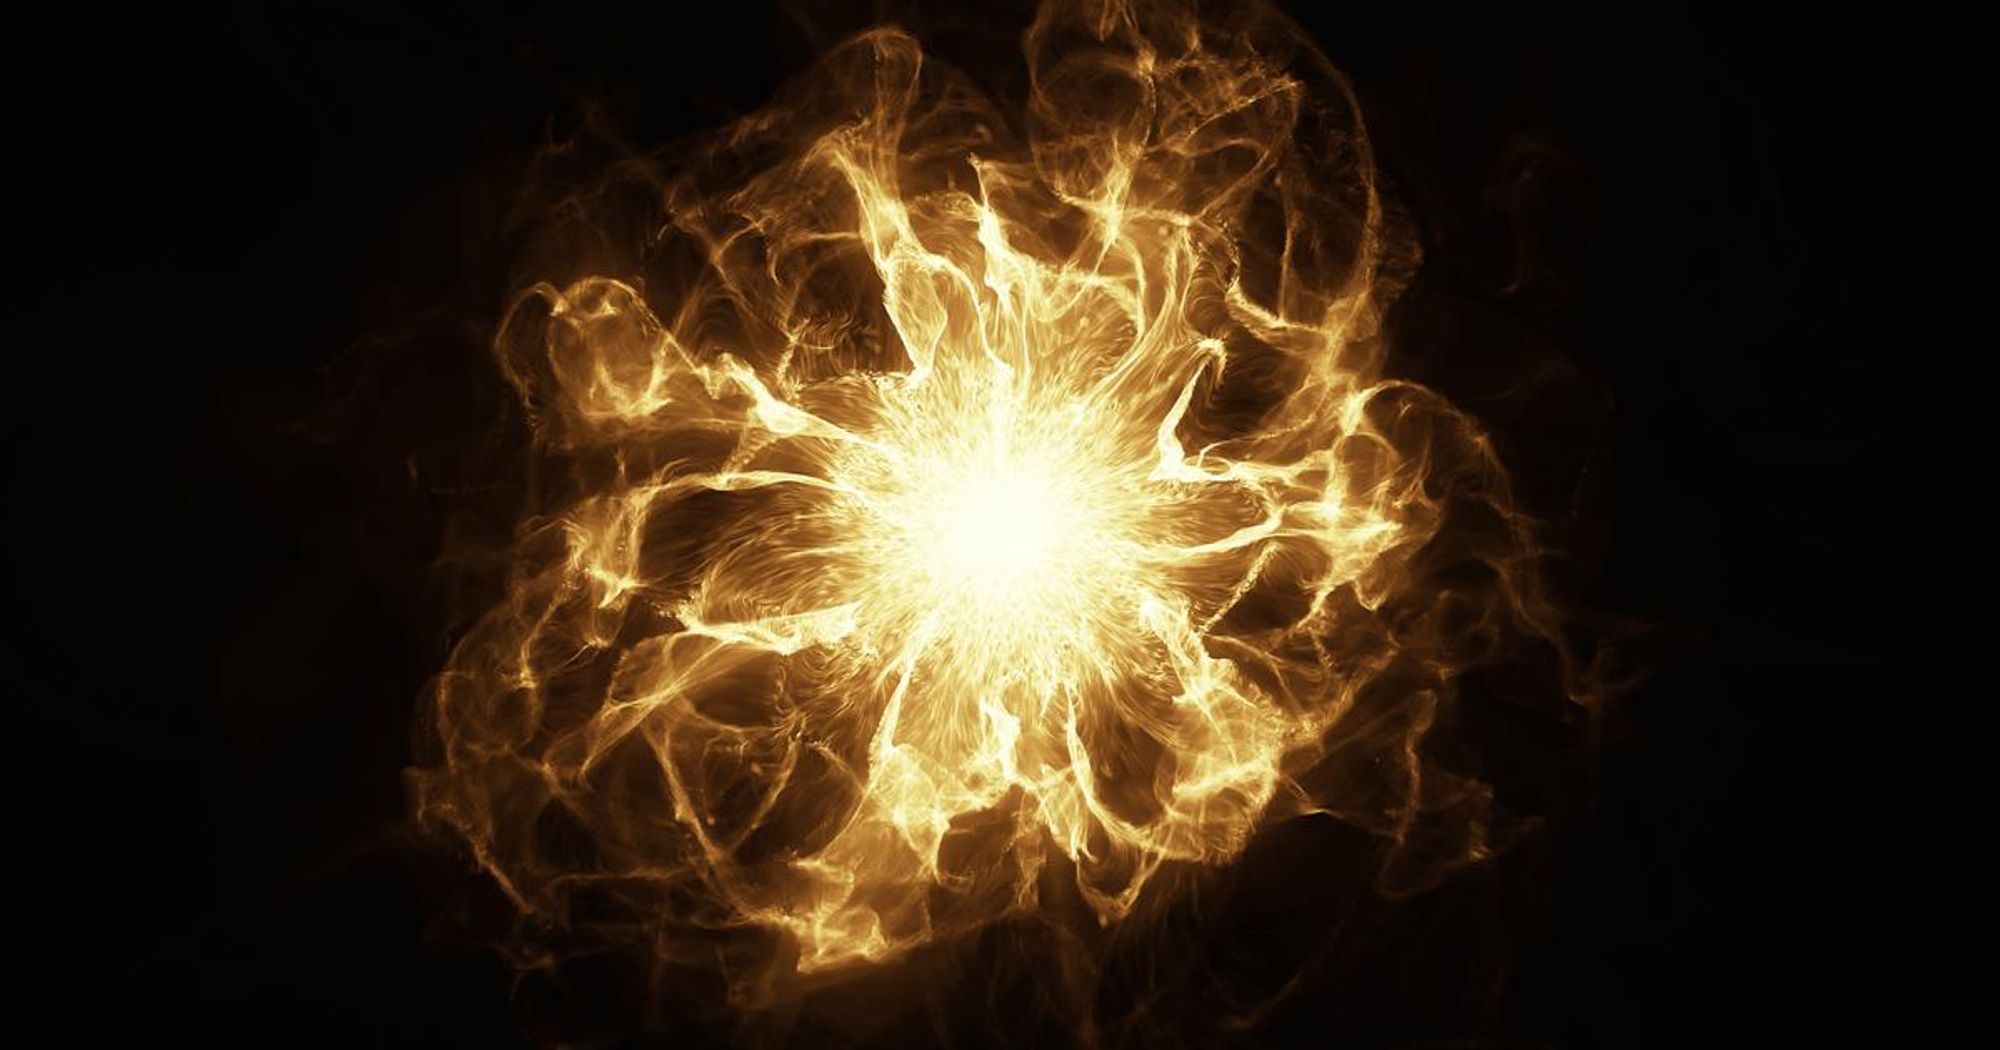 Nuclear fusion milestone creates "burning plasma" for the first time